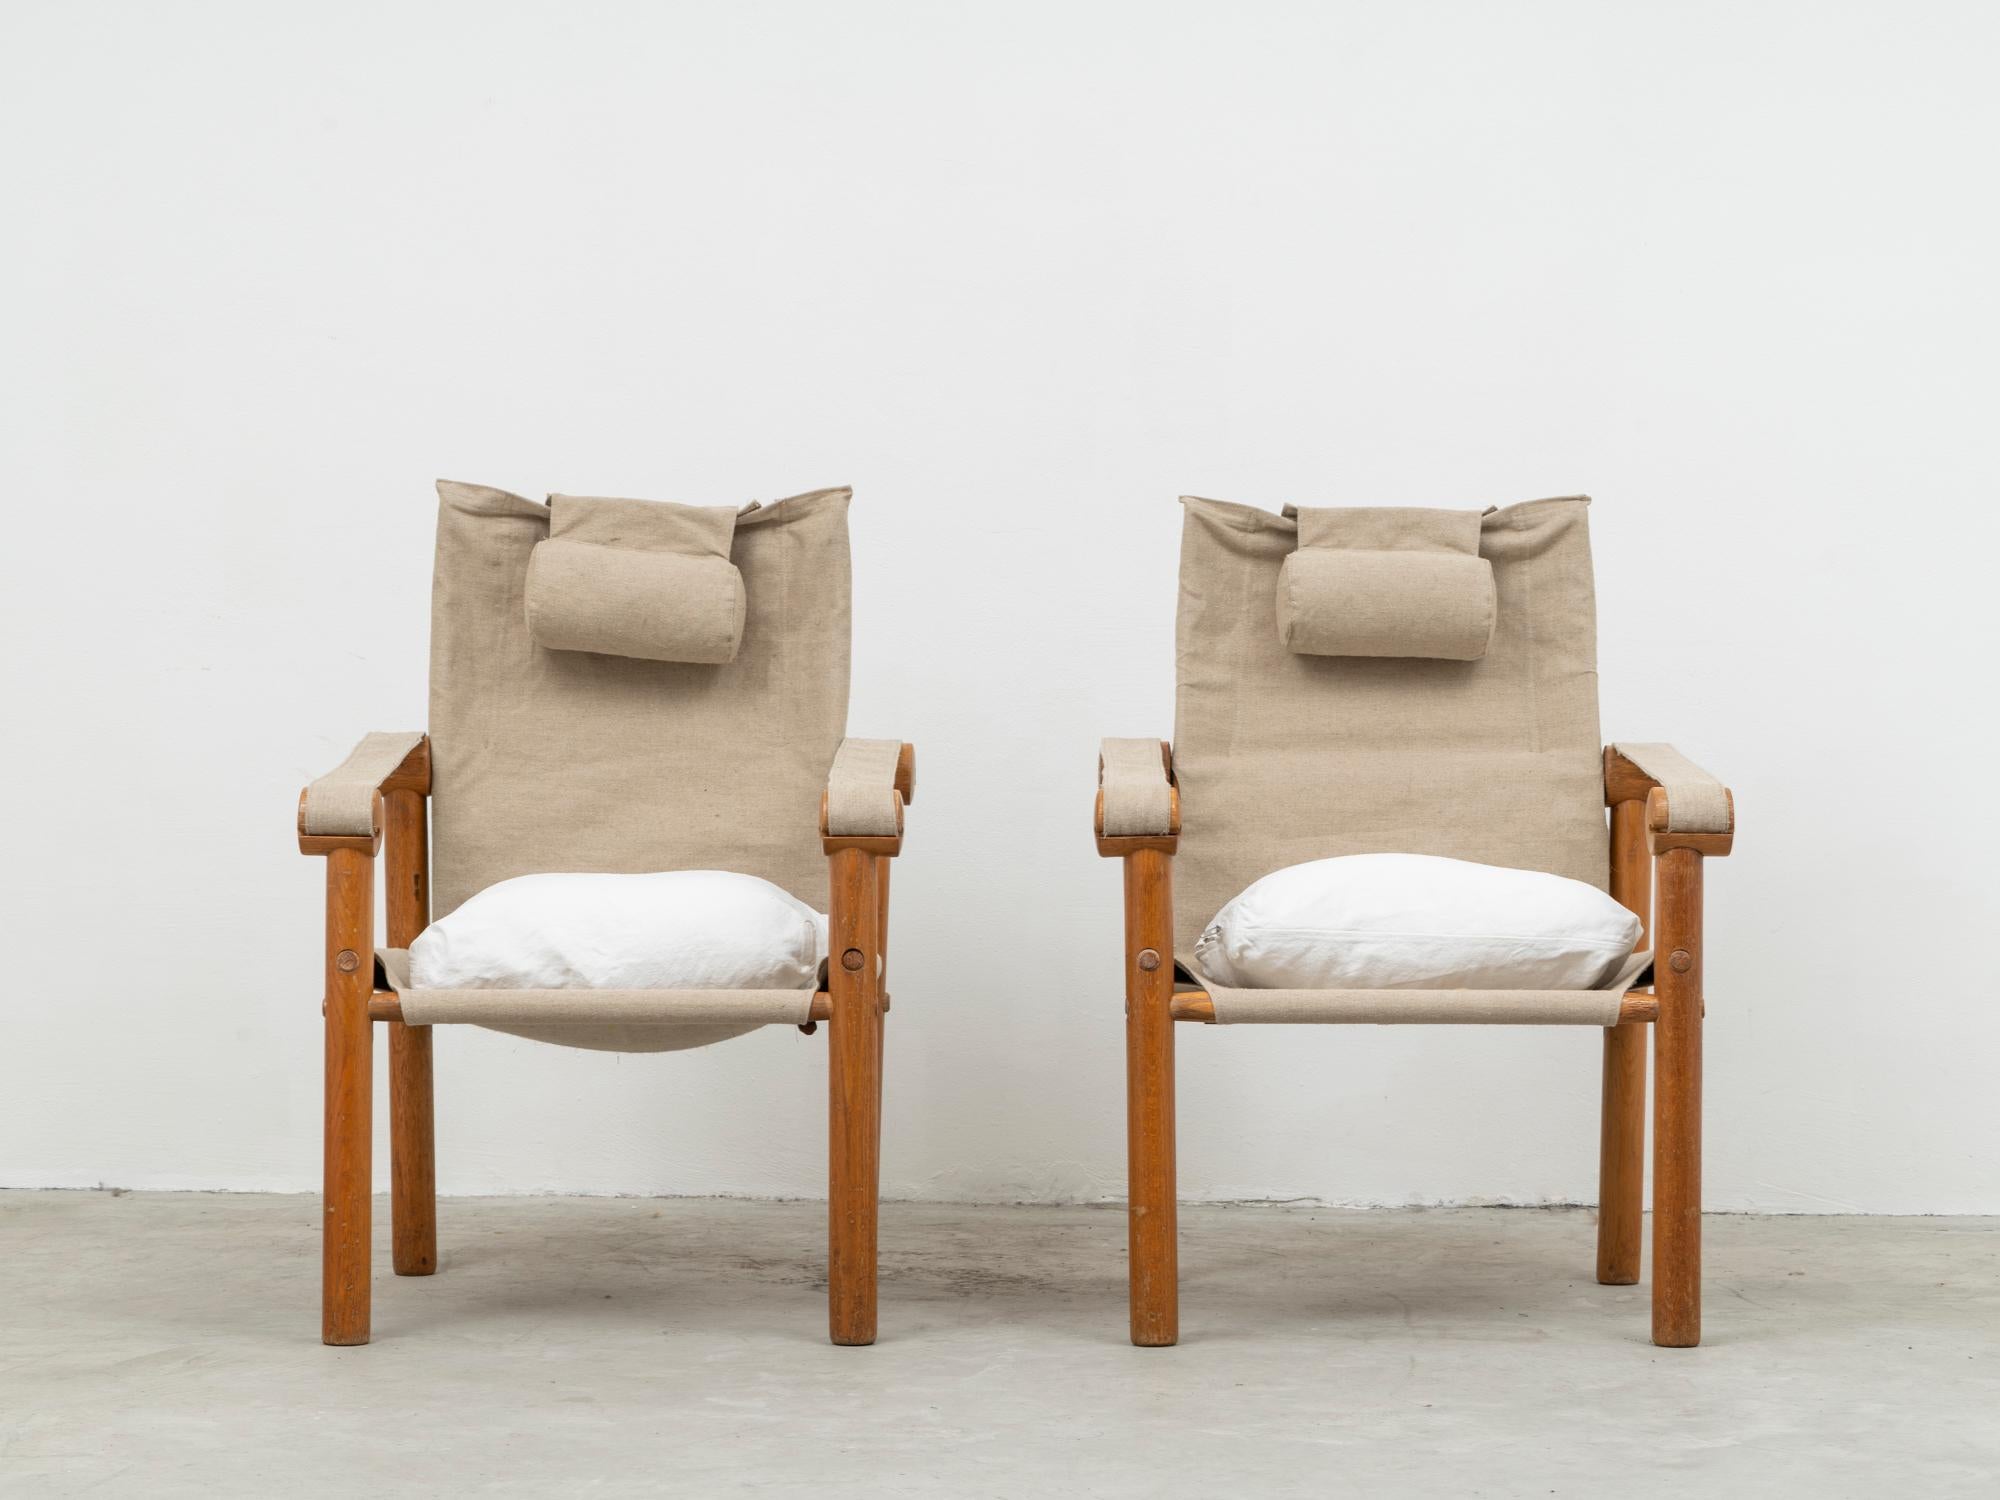 This pair of armchairs is part of the research concducted by different architect and designers on the classic colonial 